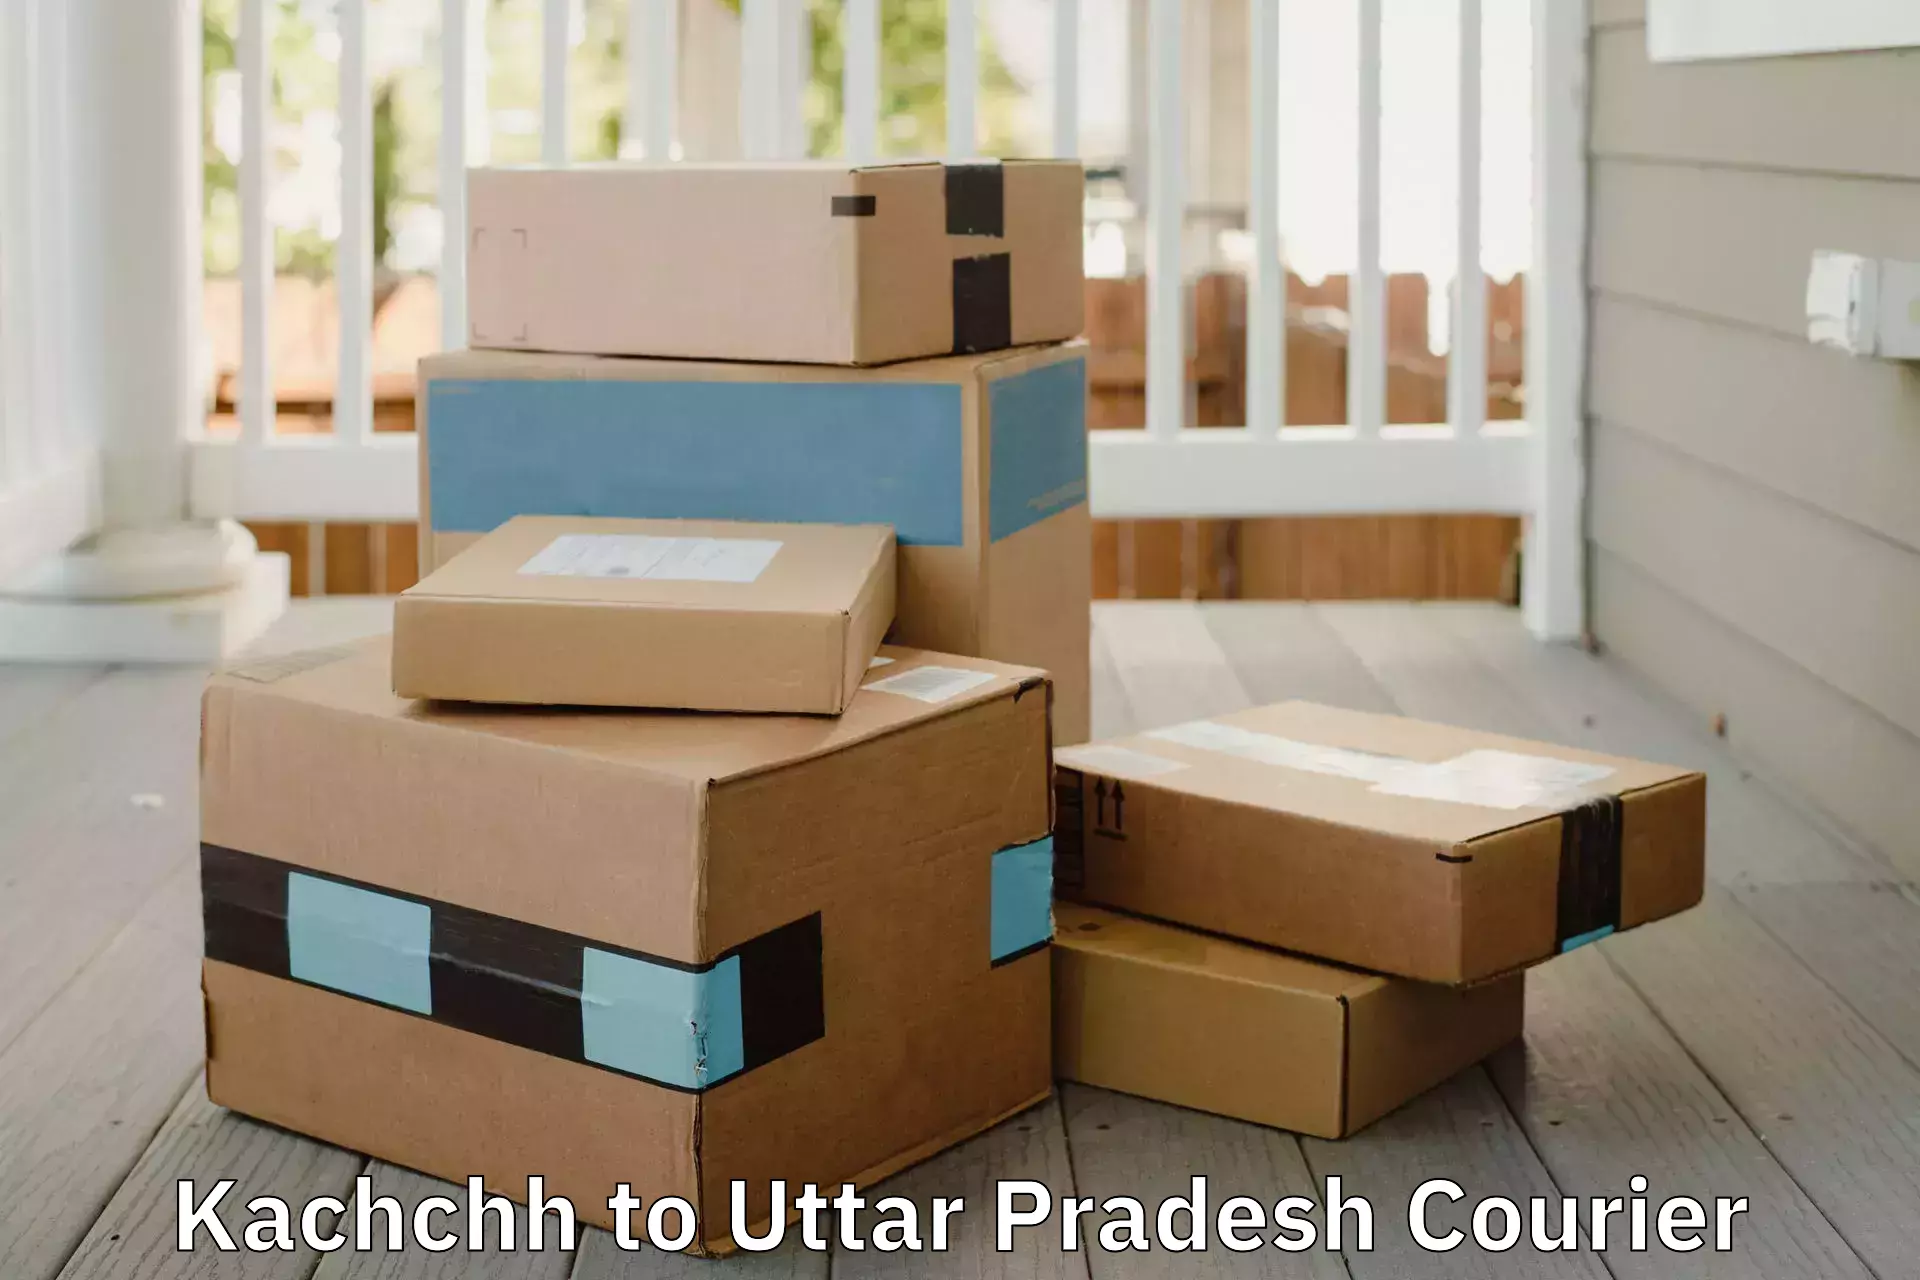 Efficient household moving Kachchh to Lucknow